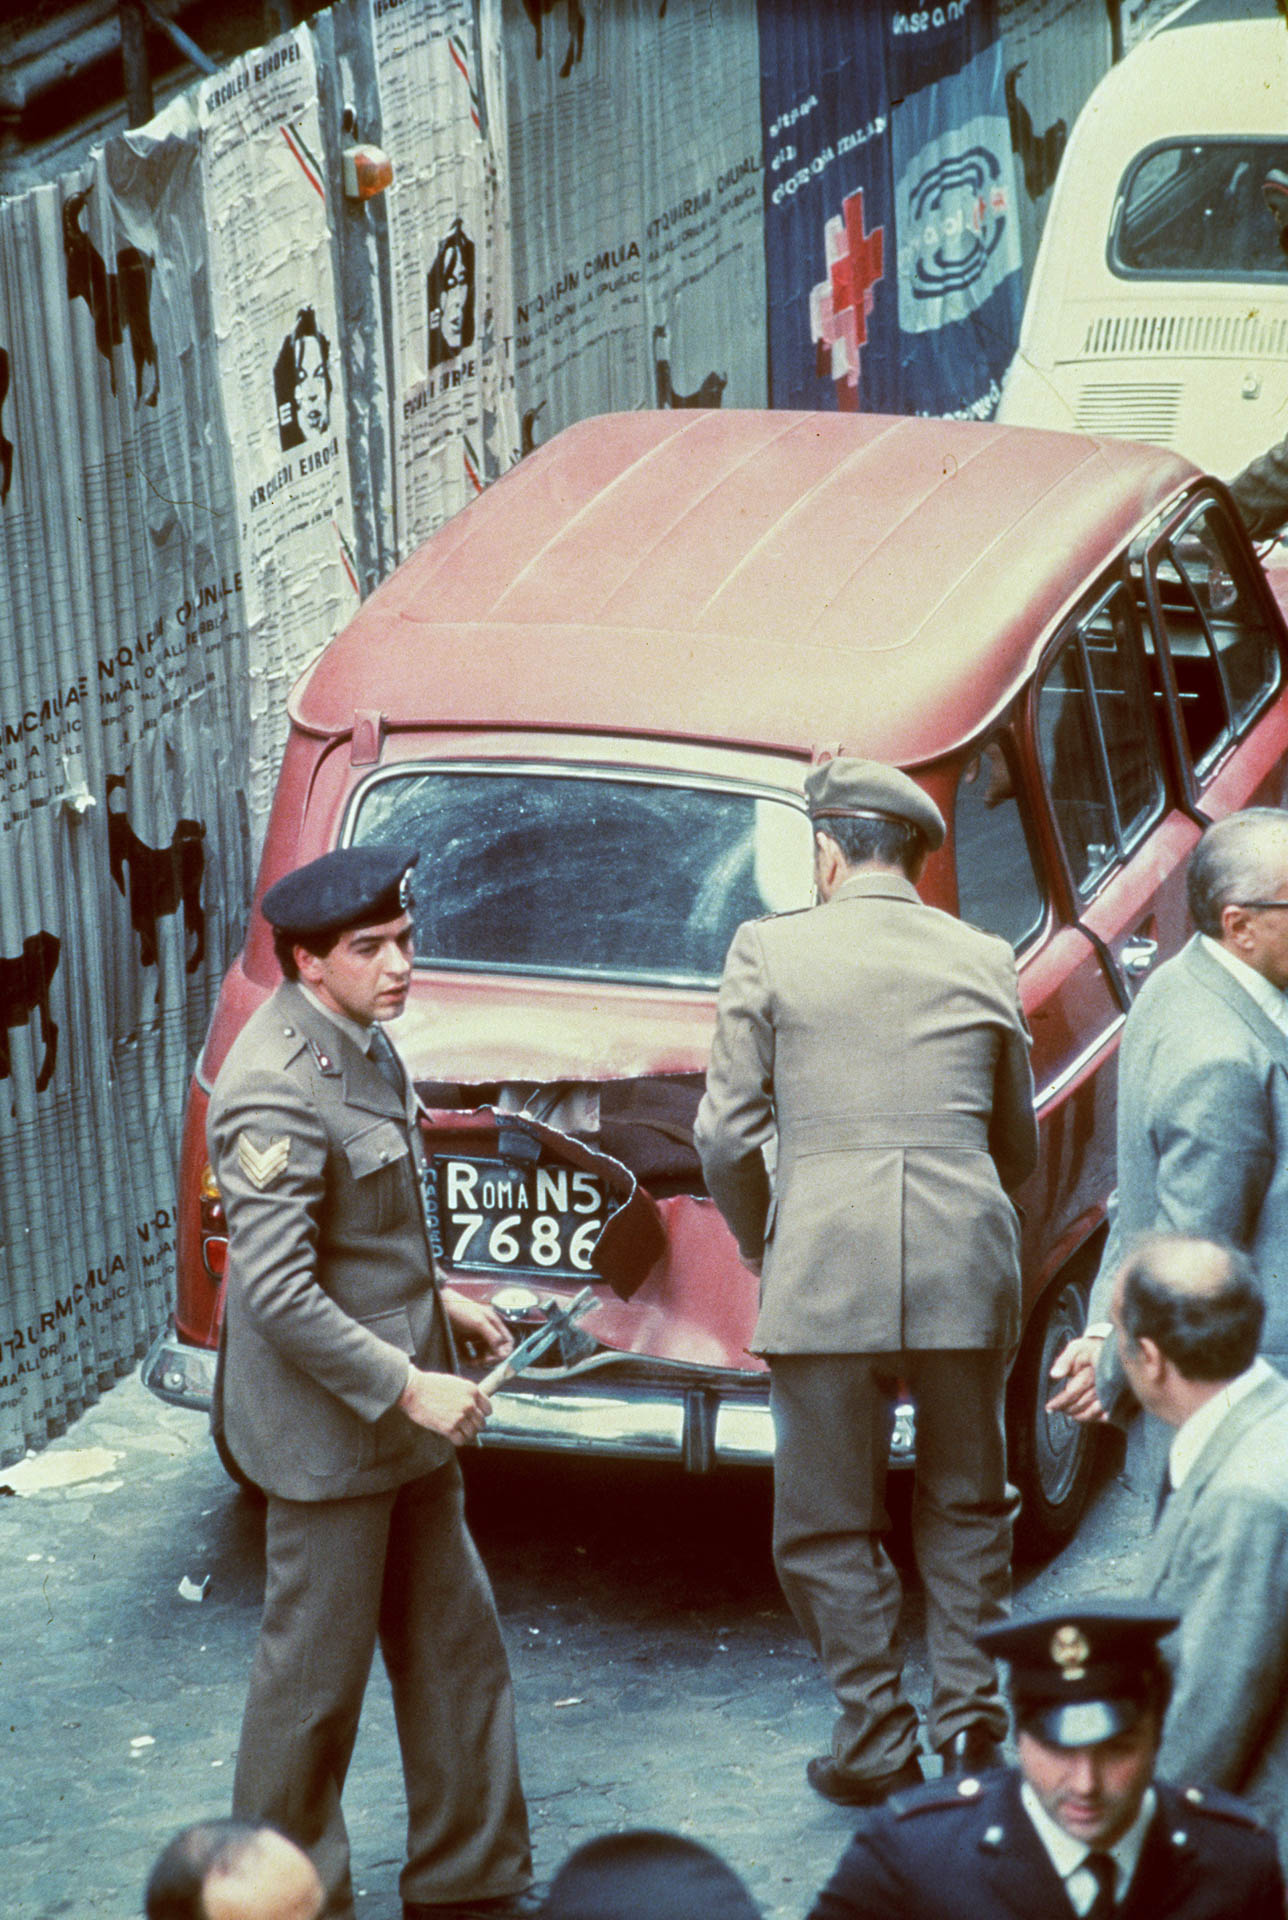  Rome, Italy 9 May 1978 The discovery of Aldo Moro's corpse inside the red Renault in Caetani street.&nbsp; 